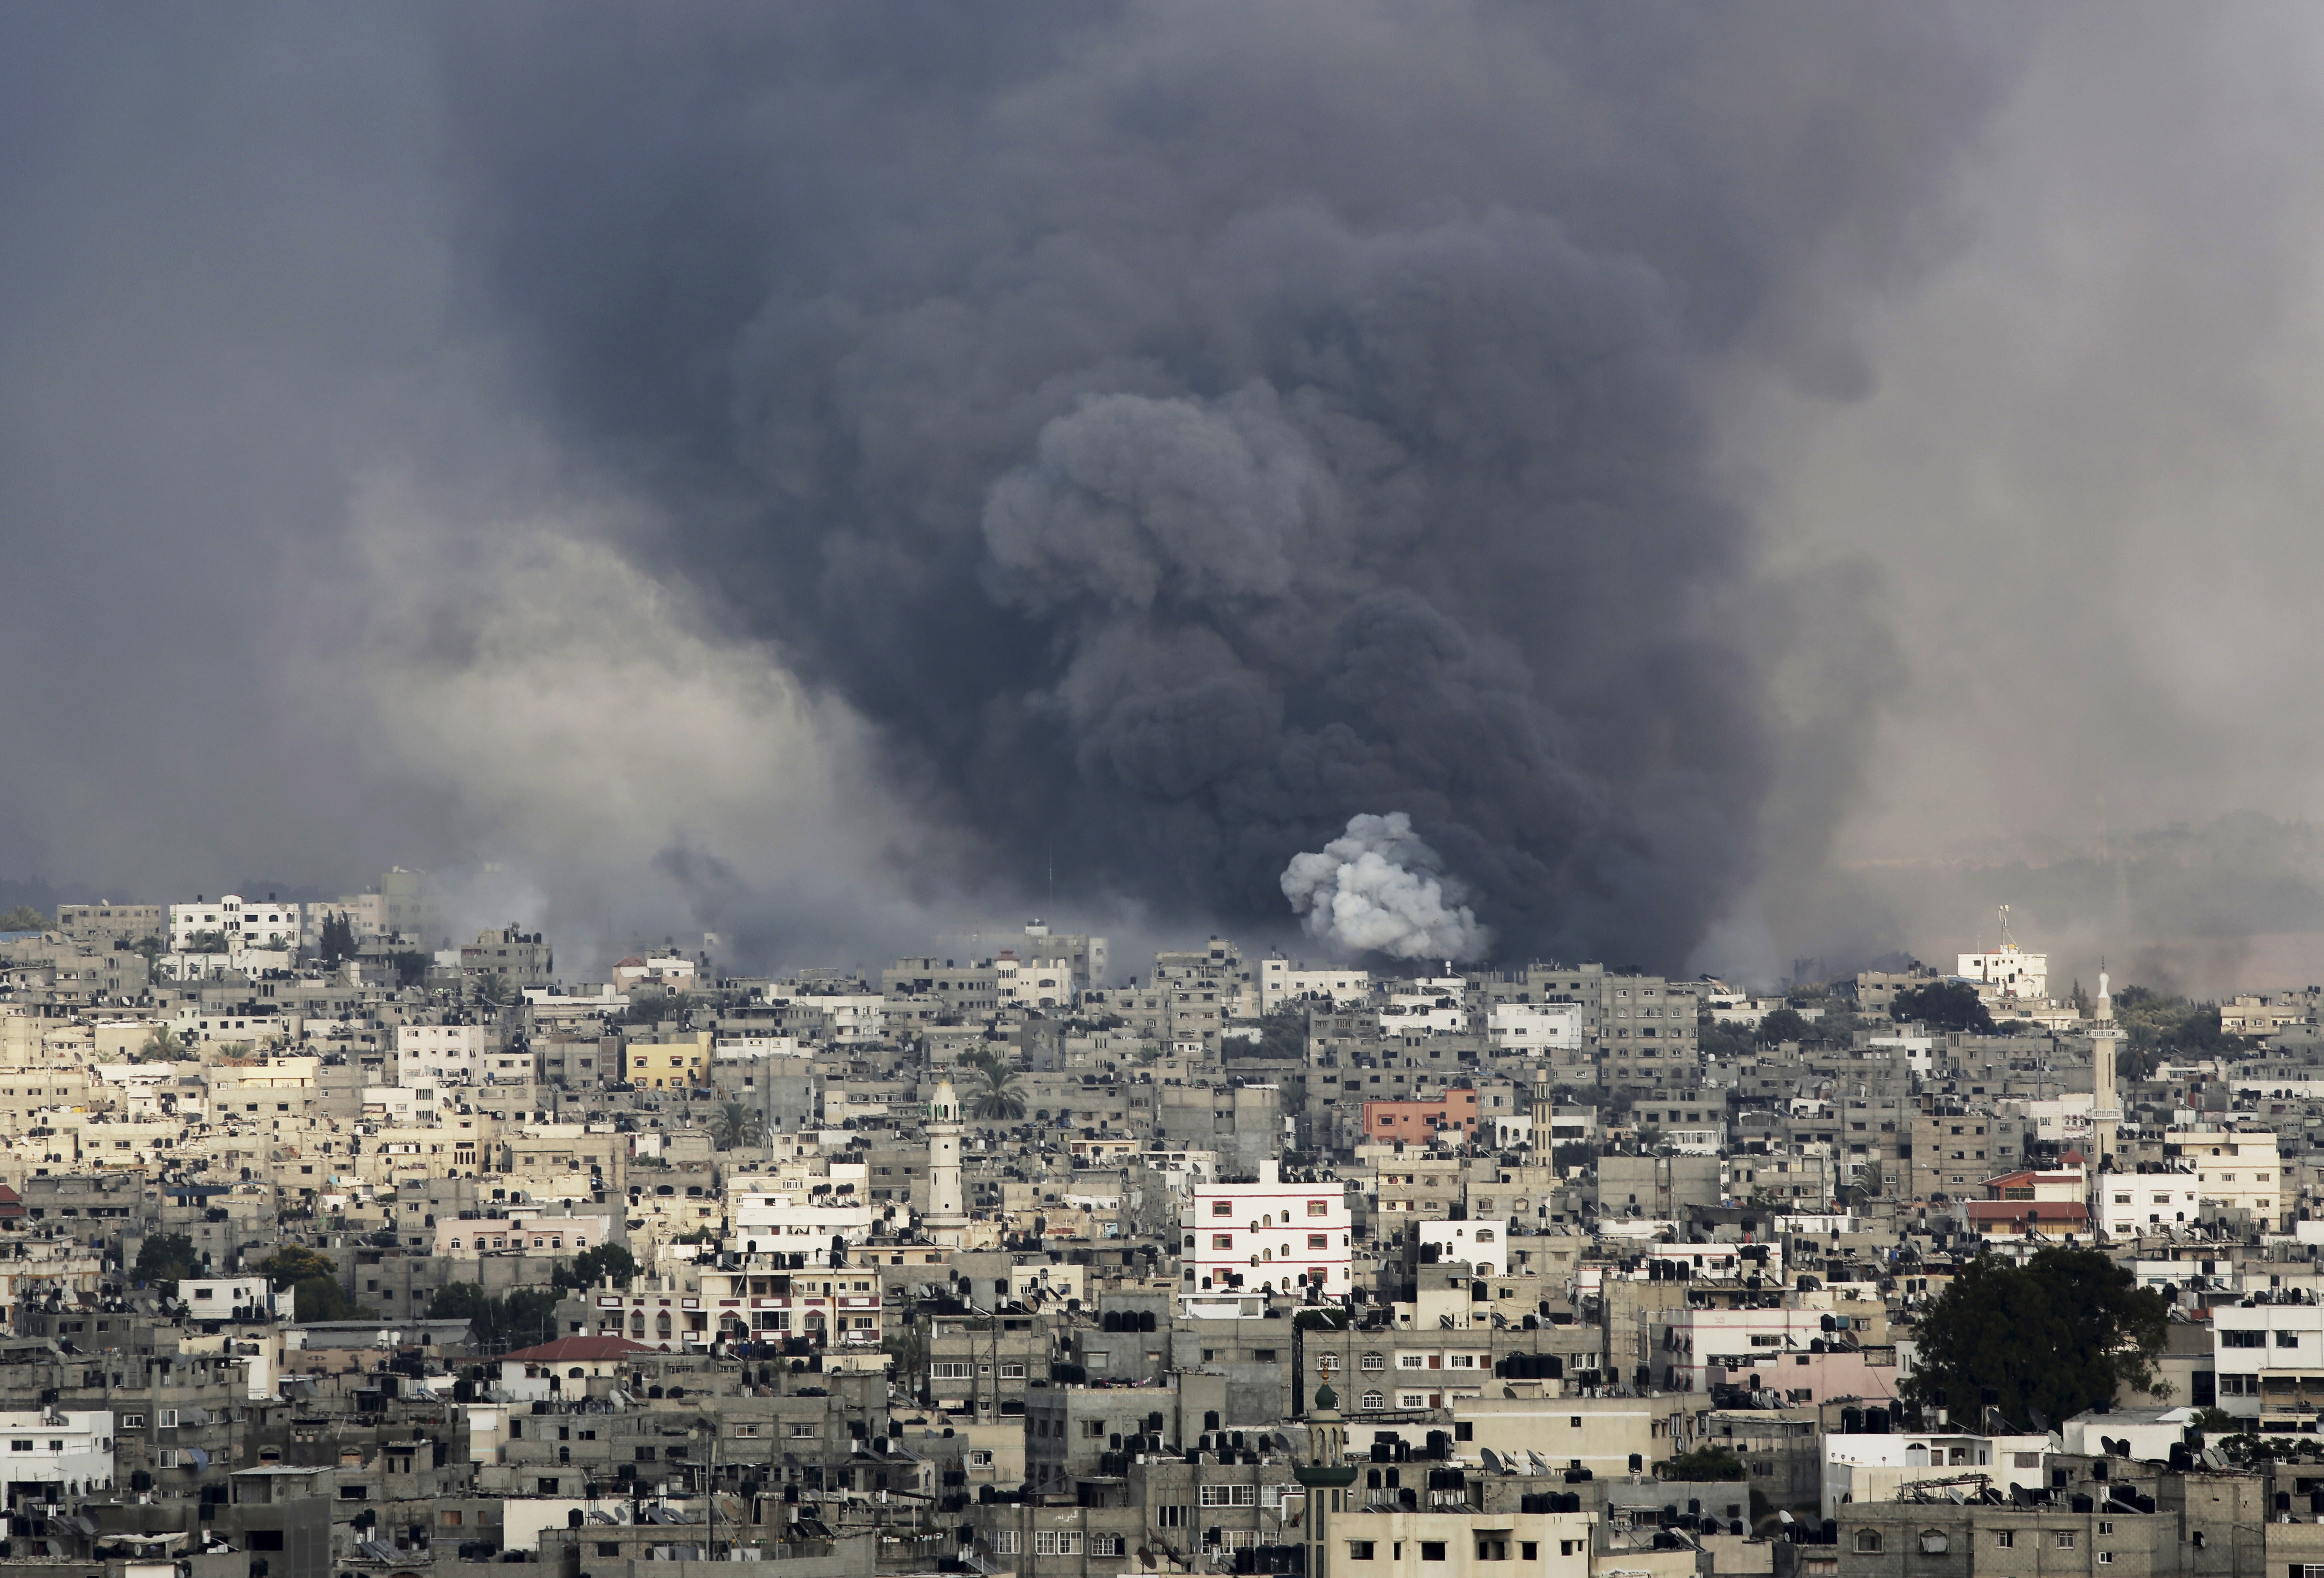 Smoke rises from explosions caused by an Israeli missile strike in the Shijaiyah neighborhood in Gaza City on 20 July, AP Photo/Adel Hana